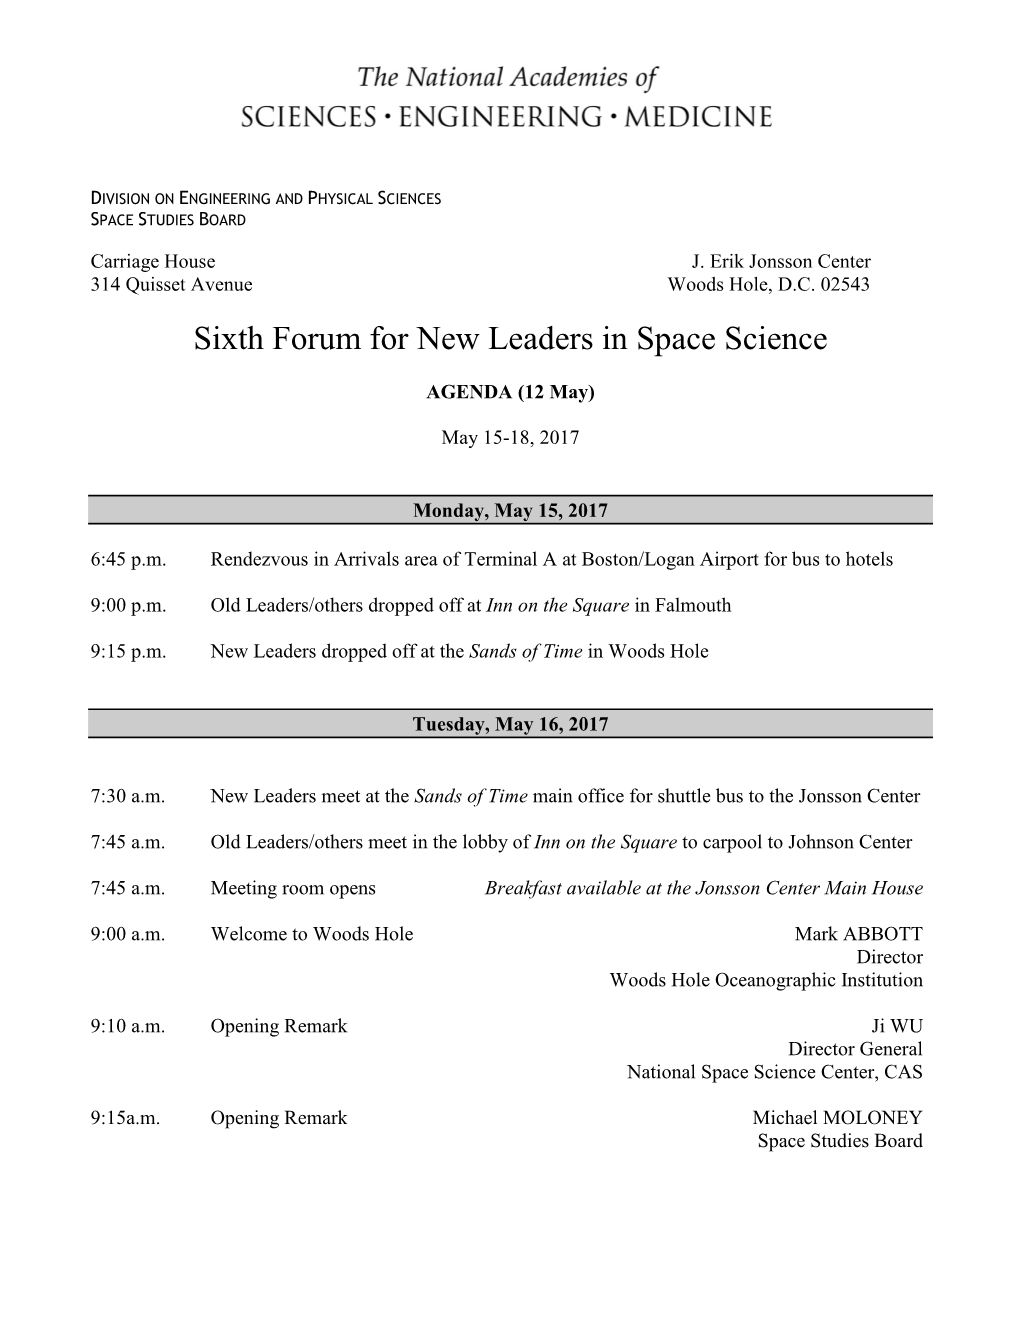 Sixth Forum for New Leaders in Space Science